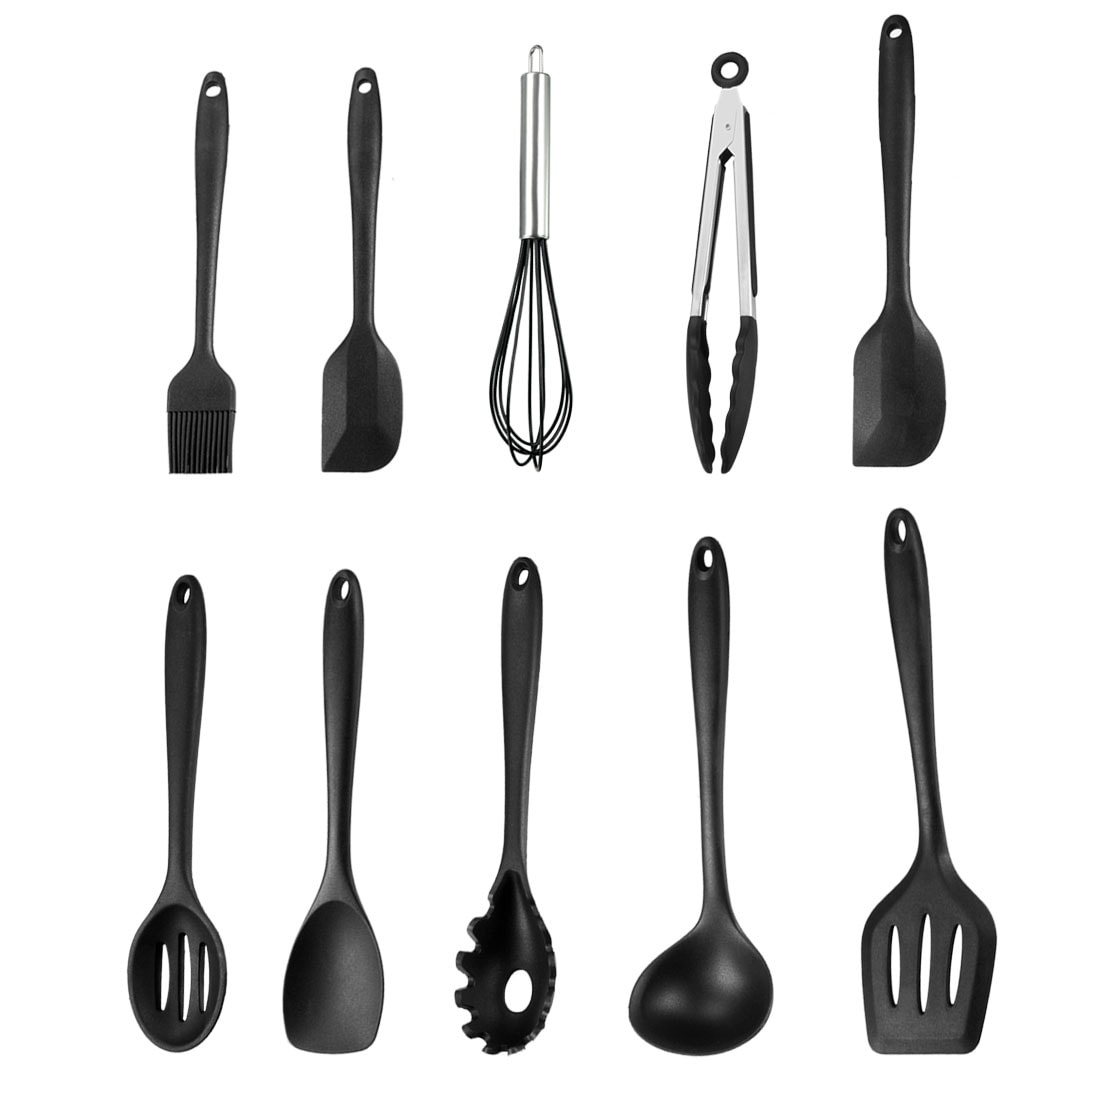 https://ak1.ostkcdn.com/images/products/is/images/direct/5294f42ebfe8414515d5ebf894acd0ba5a9663ec/Kitchen-Utensil-Set---Silicone-Cooking-Utensils.-Gadgets-for-Nonstick-Cookware.jpg